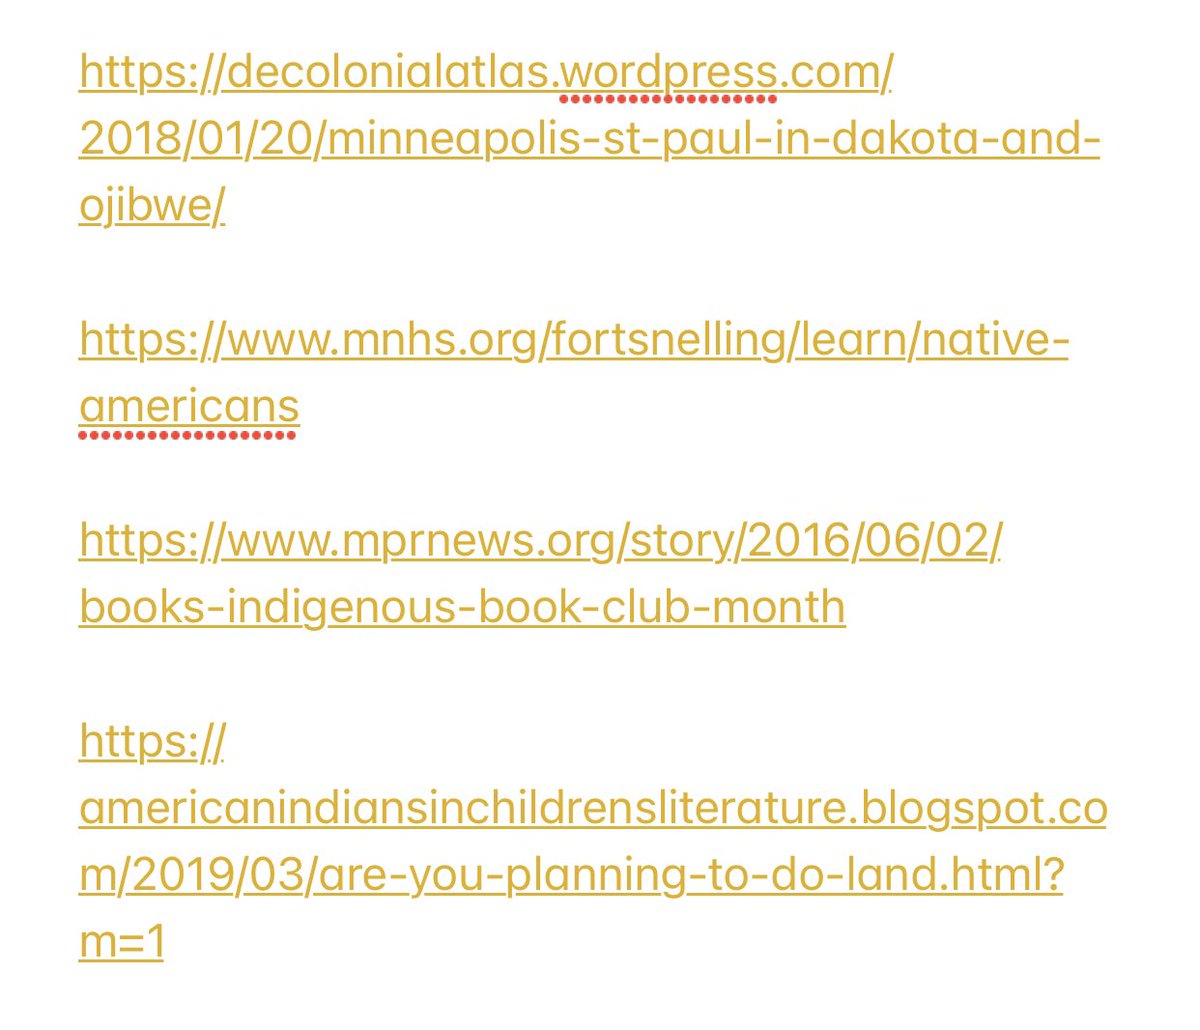 (These were the sources uses to write this thread; thank you to all authors and contributors!)